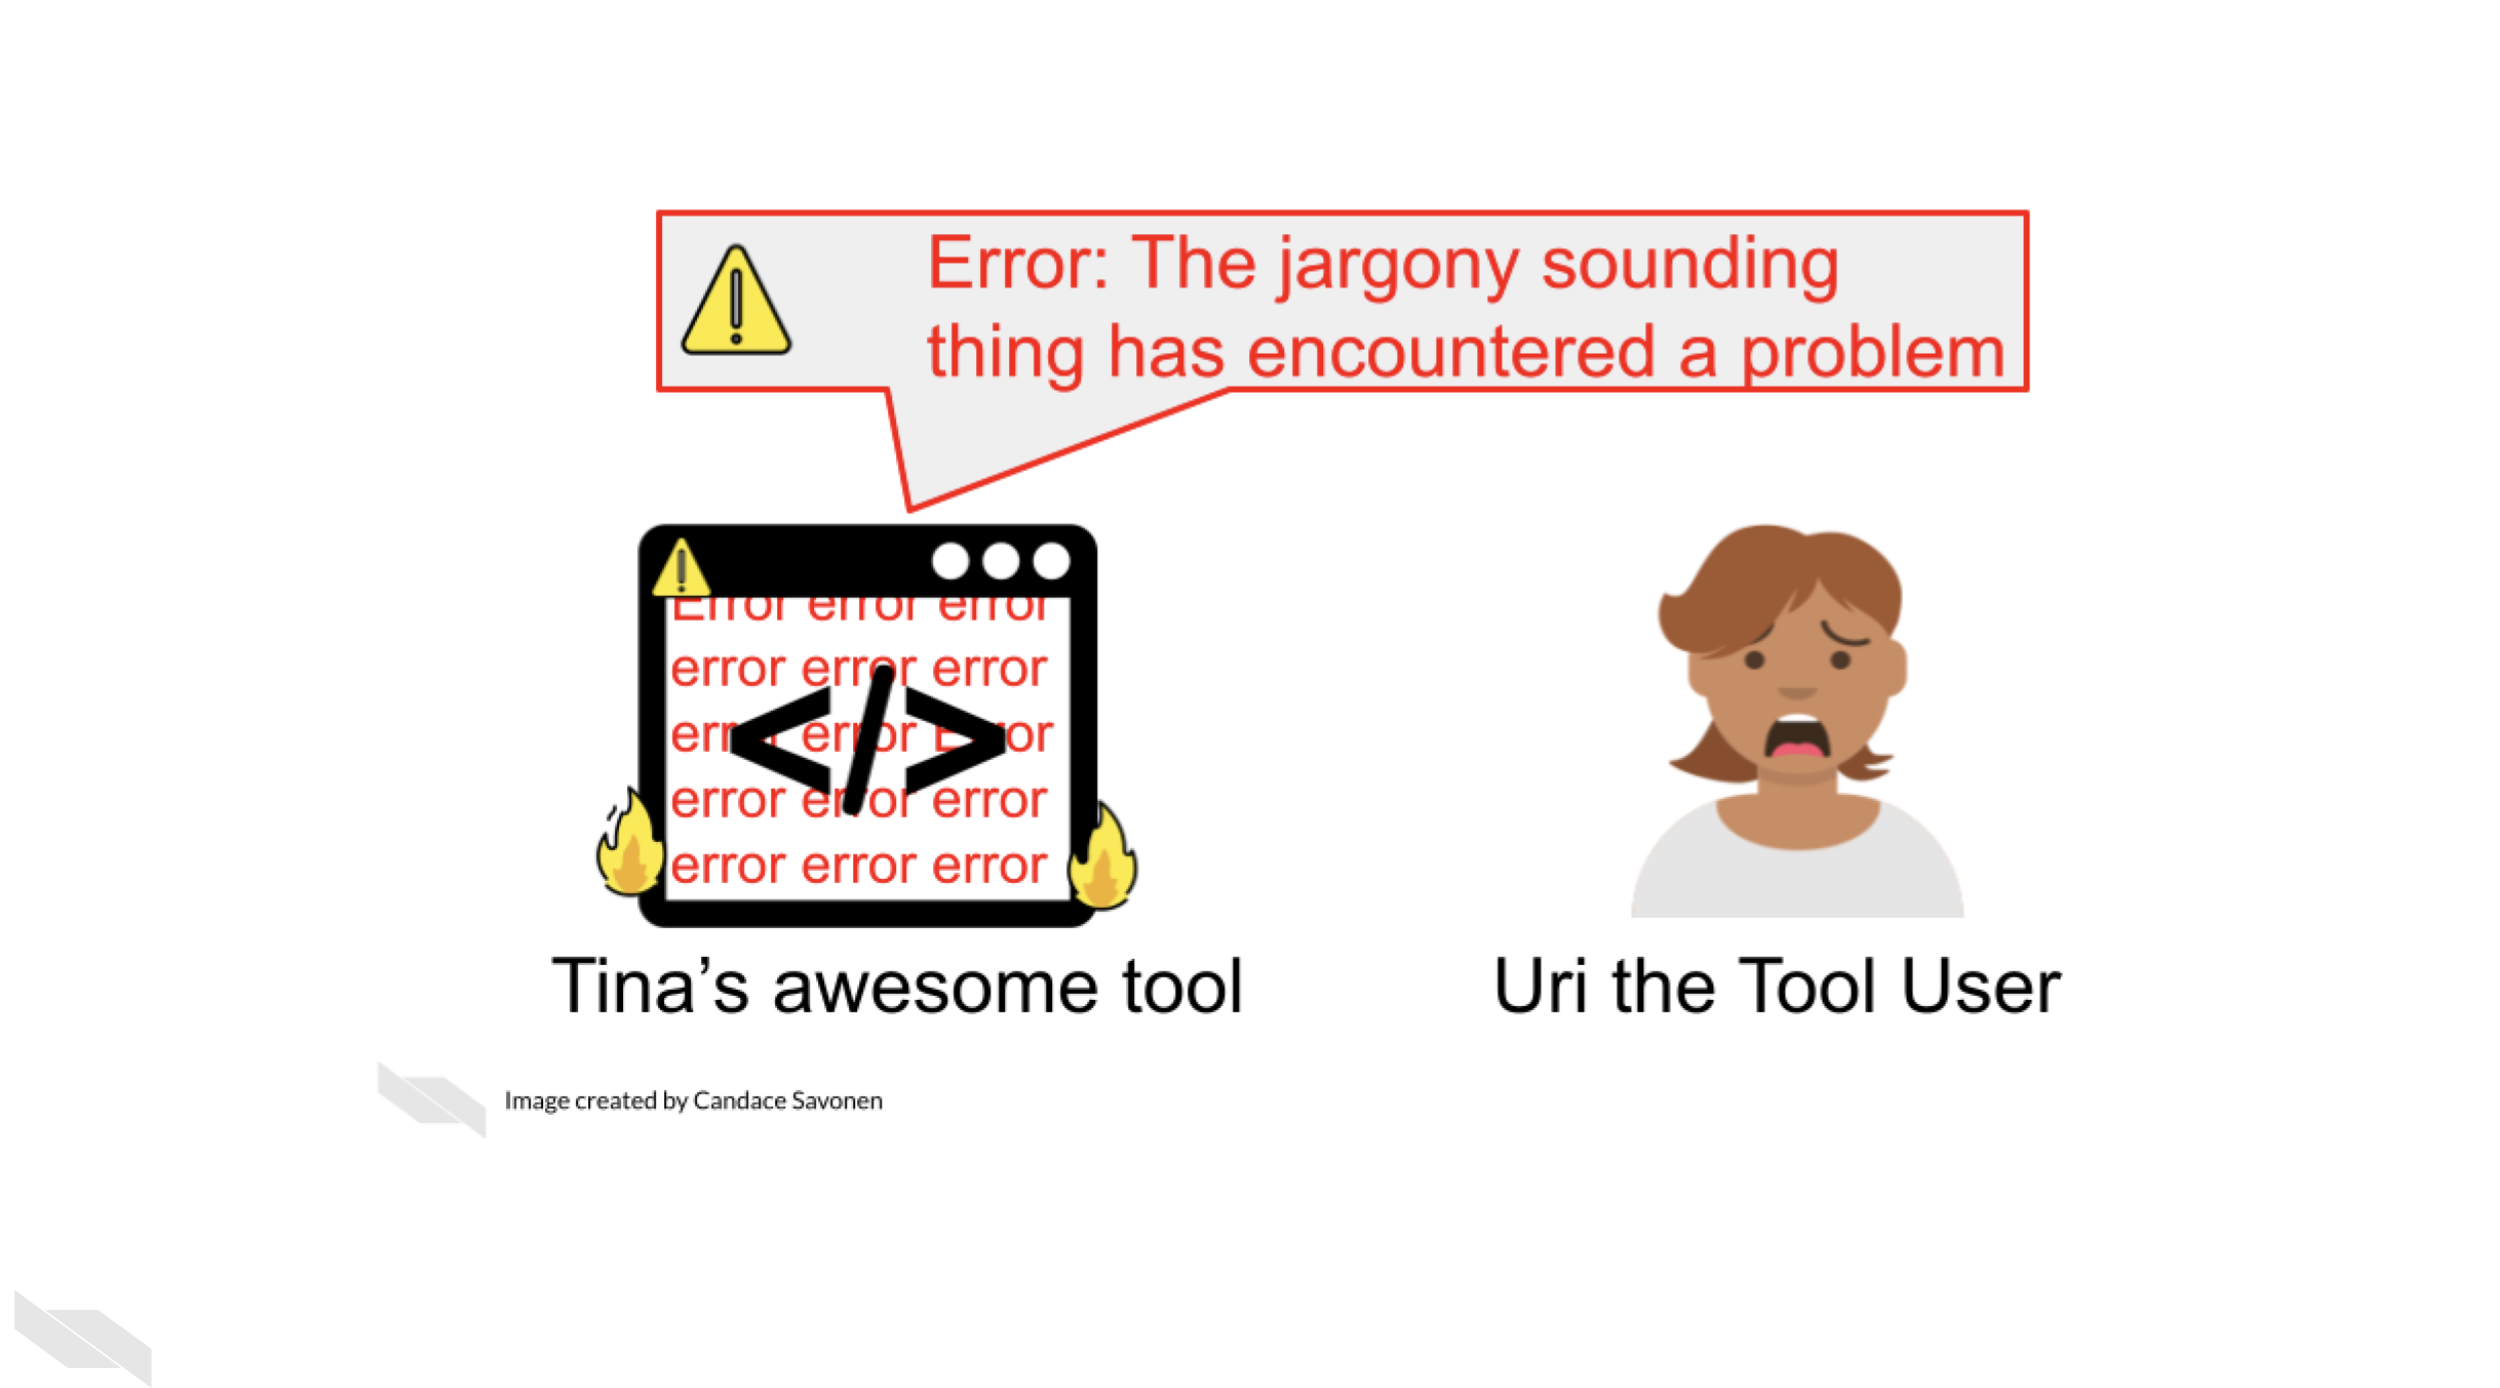 Tina’s awesome tool says unintelligible warning, Error: The jargony sounding thing has encountered a problem and is on fire with the word error written all over it. Uri the Tool User is distressed and confused.